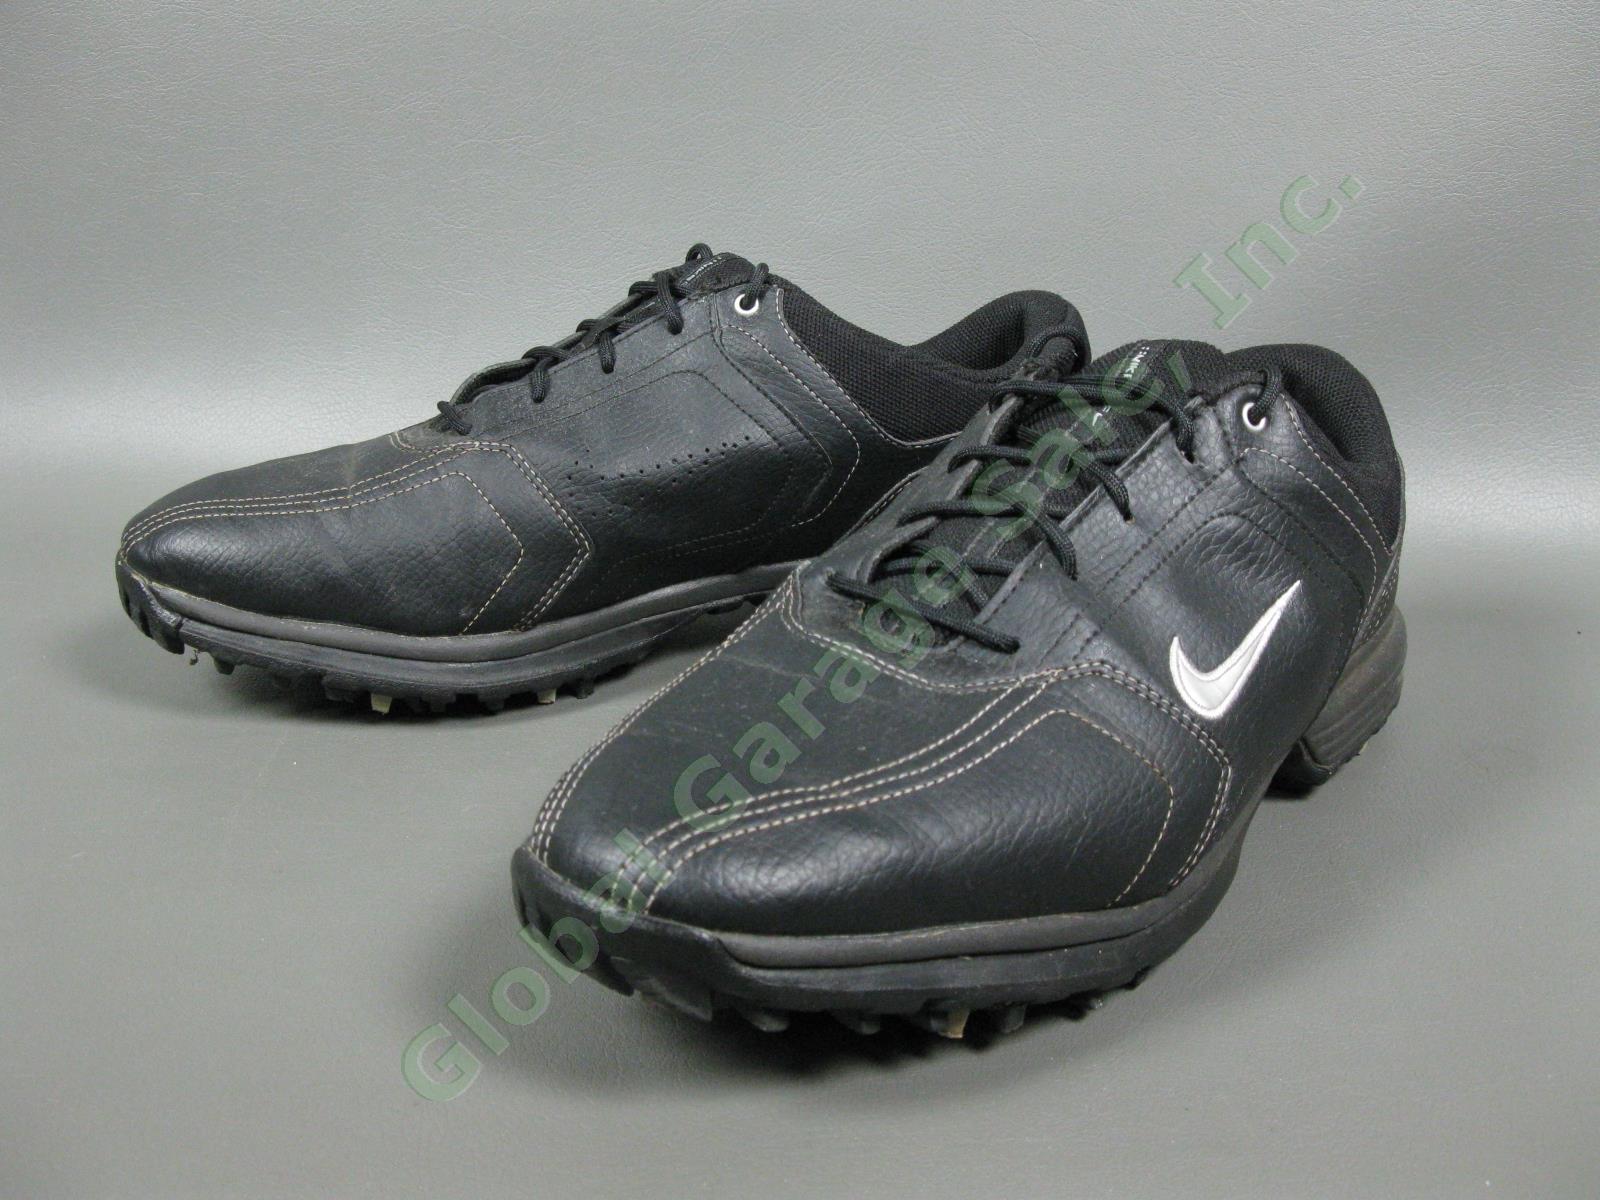 Nike Heritage Mens Leather Golf Shoe Pair Size 10 Black White Athletic Shoes